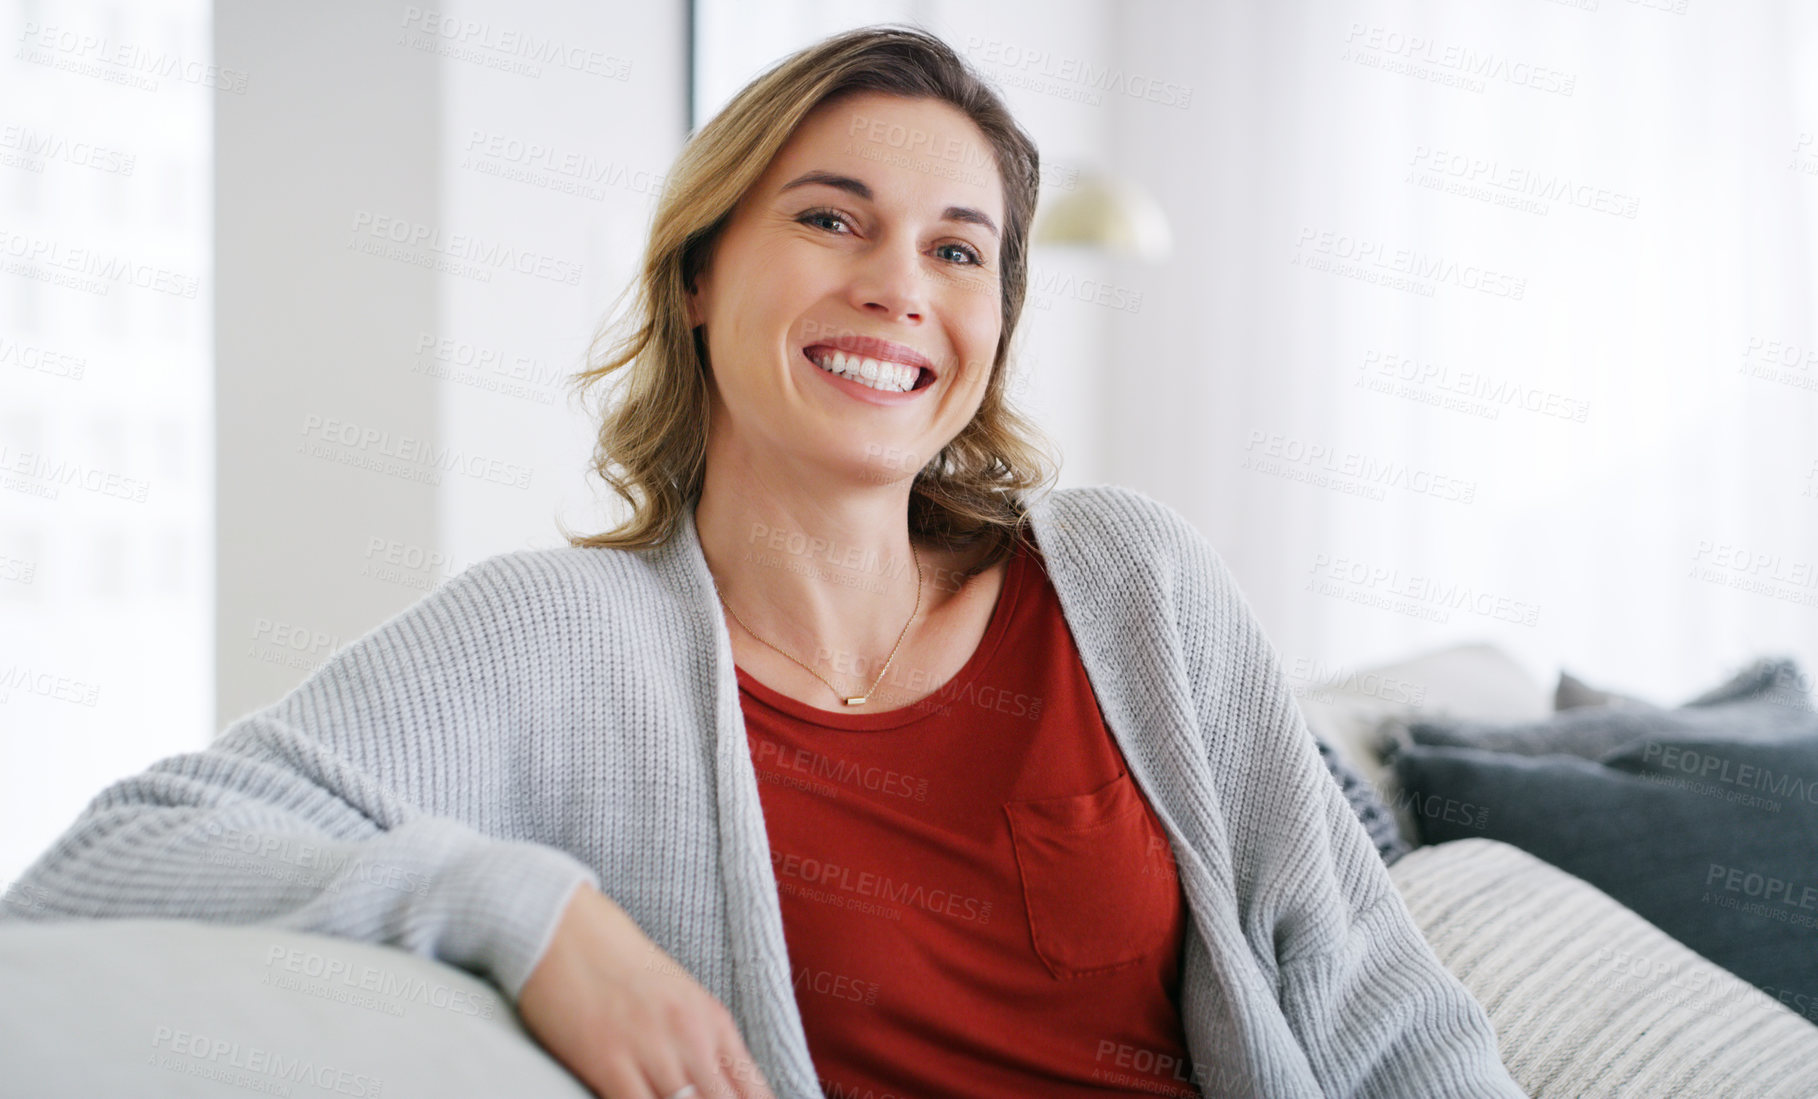 Buy stock photo Cropped shot of a middle aged woman relaxing at home